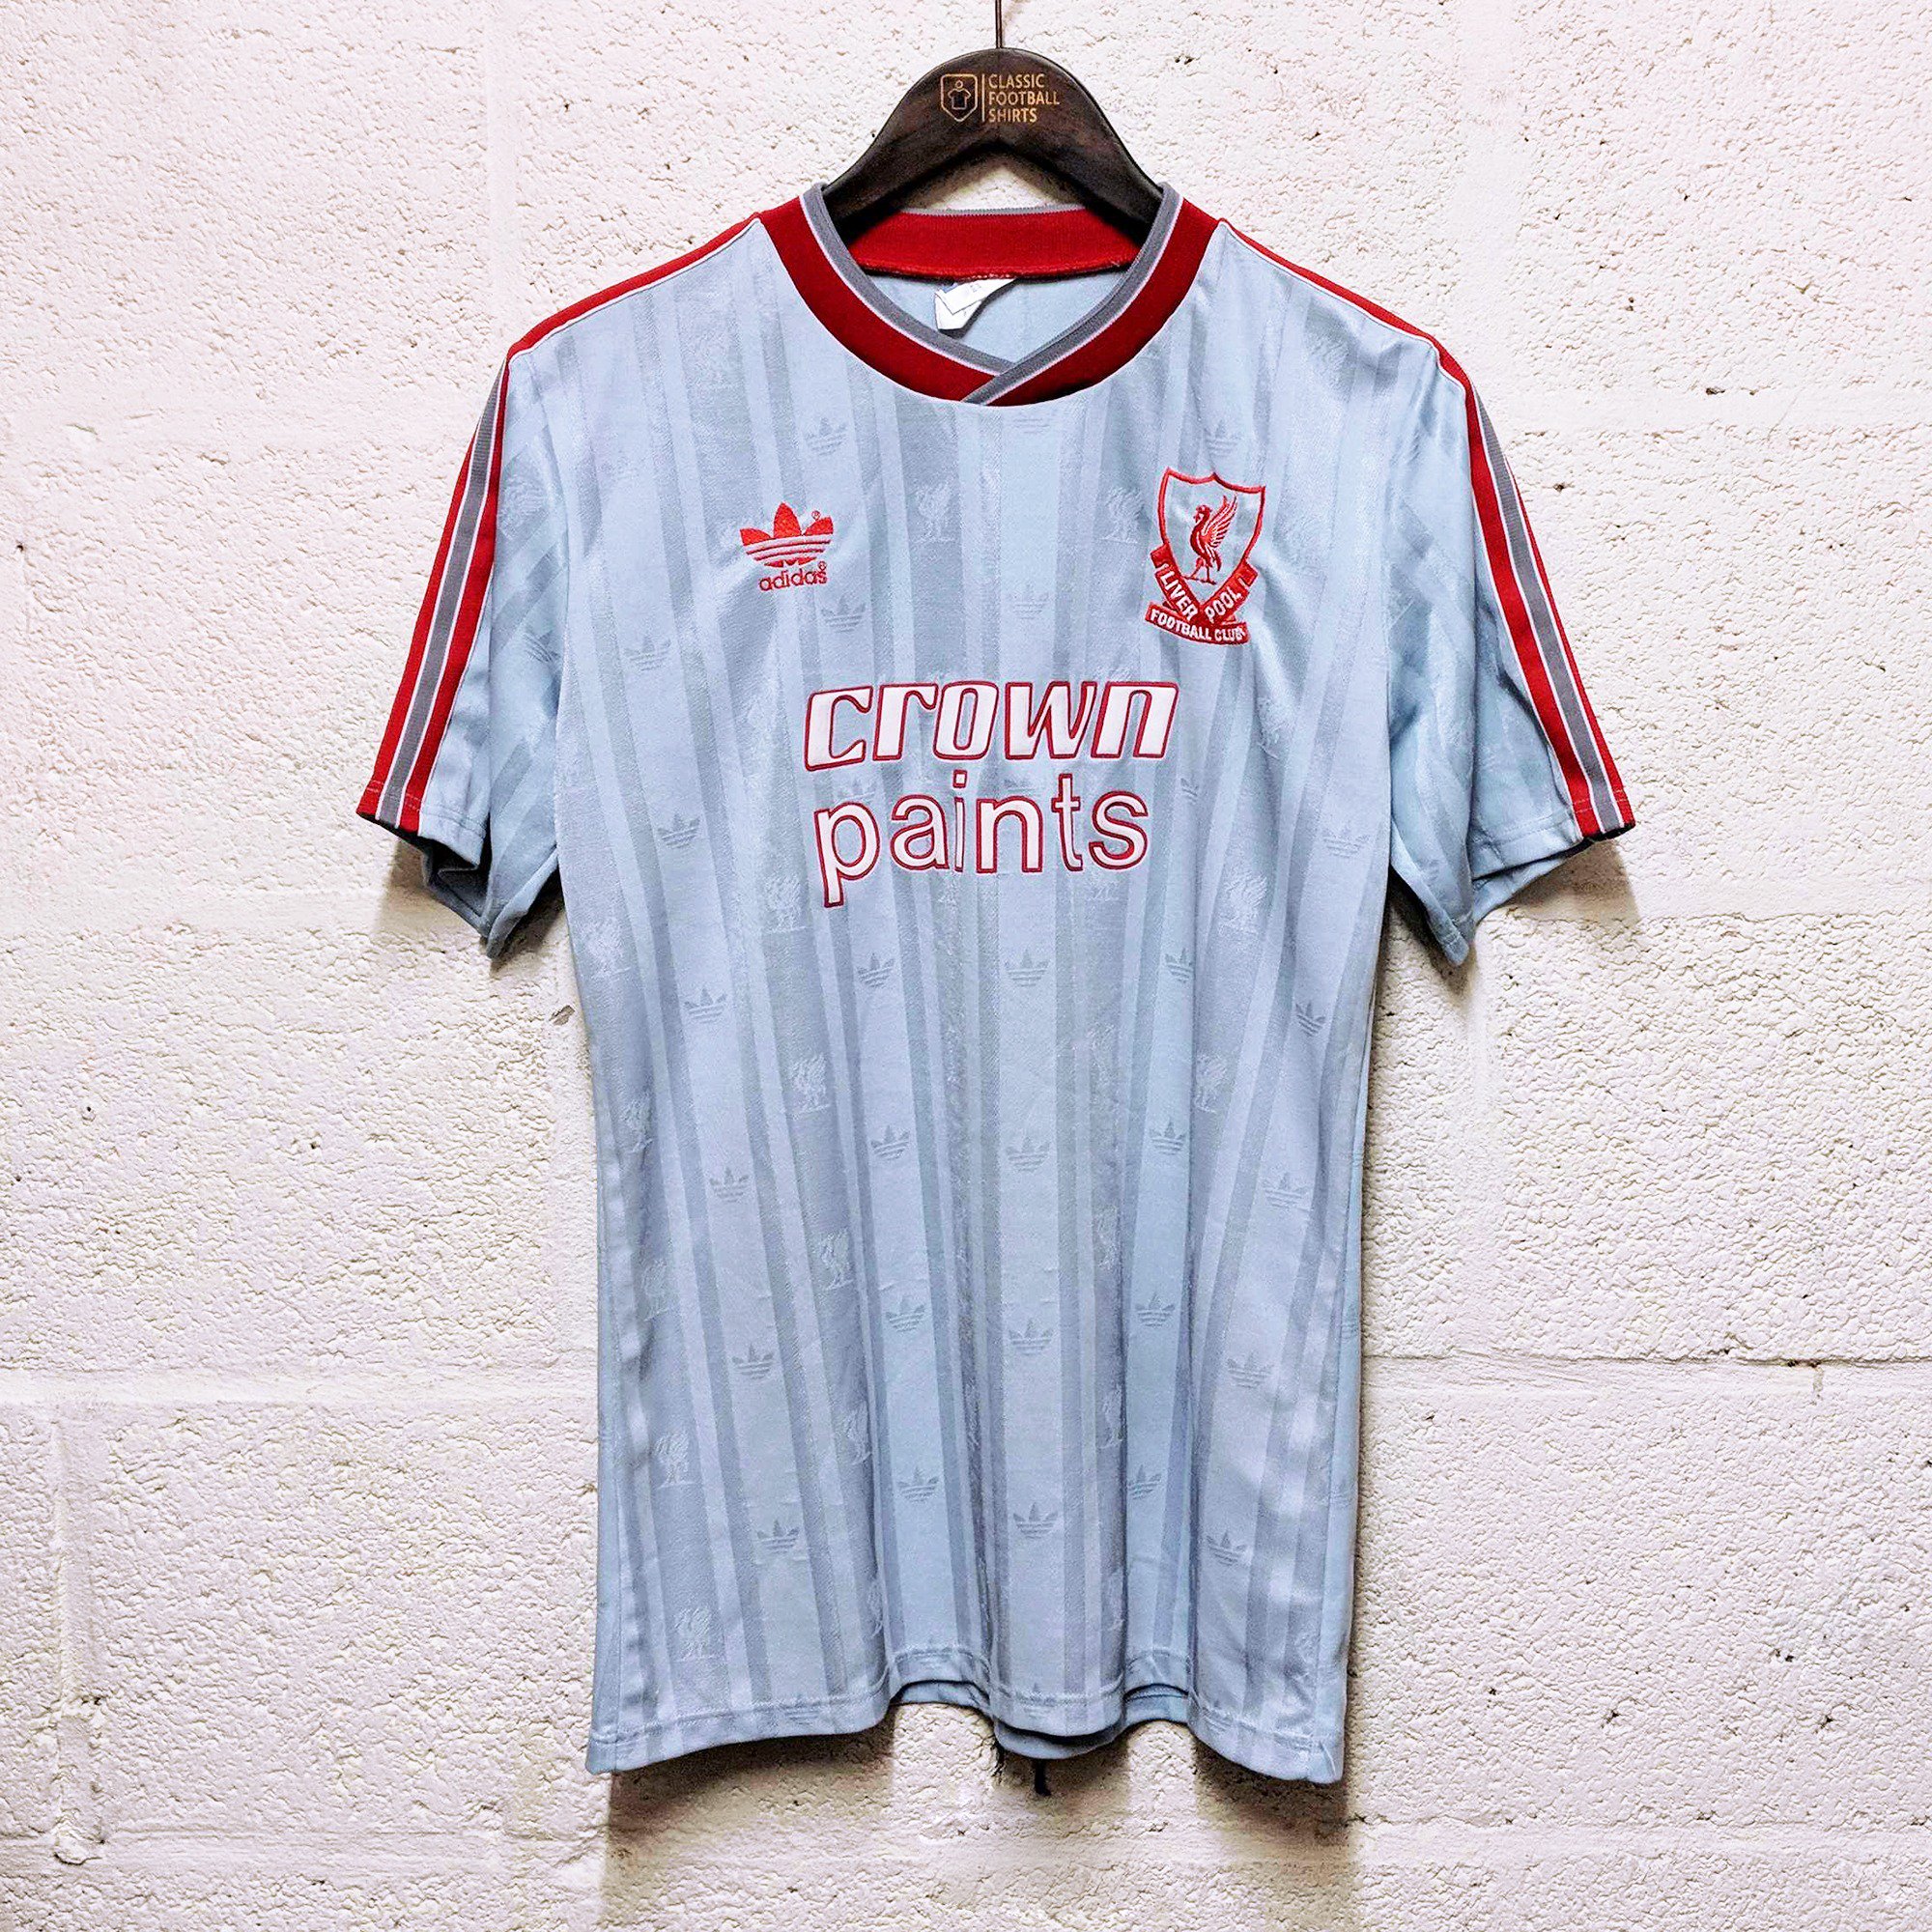 subasta representante seré fuerte Classic Football Shirts on Twitter: "Colours of Football: Liverpool in Grey  The first grey away kit was in 1987-88 and featured the classic Crown Paints  sponsor https://t.co/tTjFqZfaT7" / Twitter